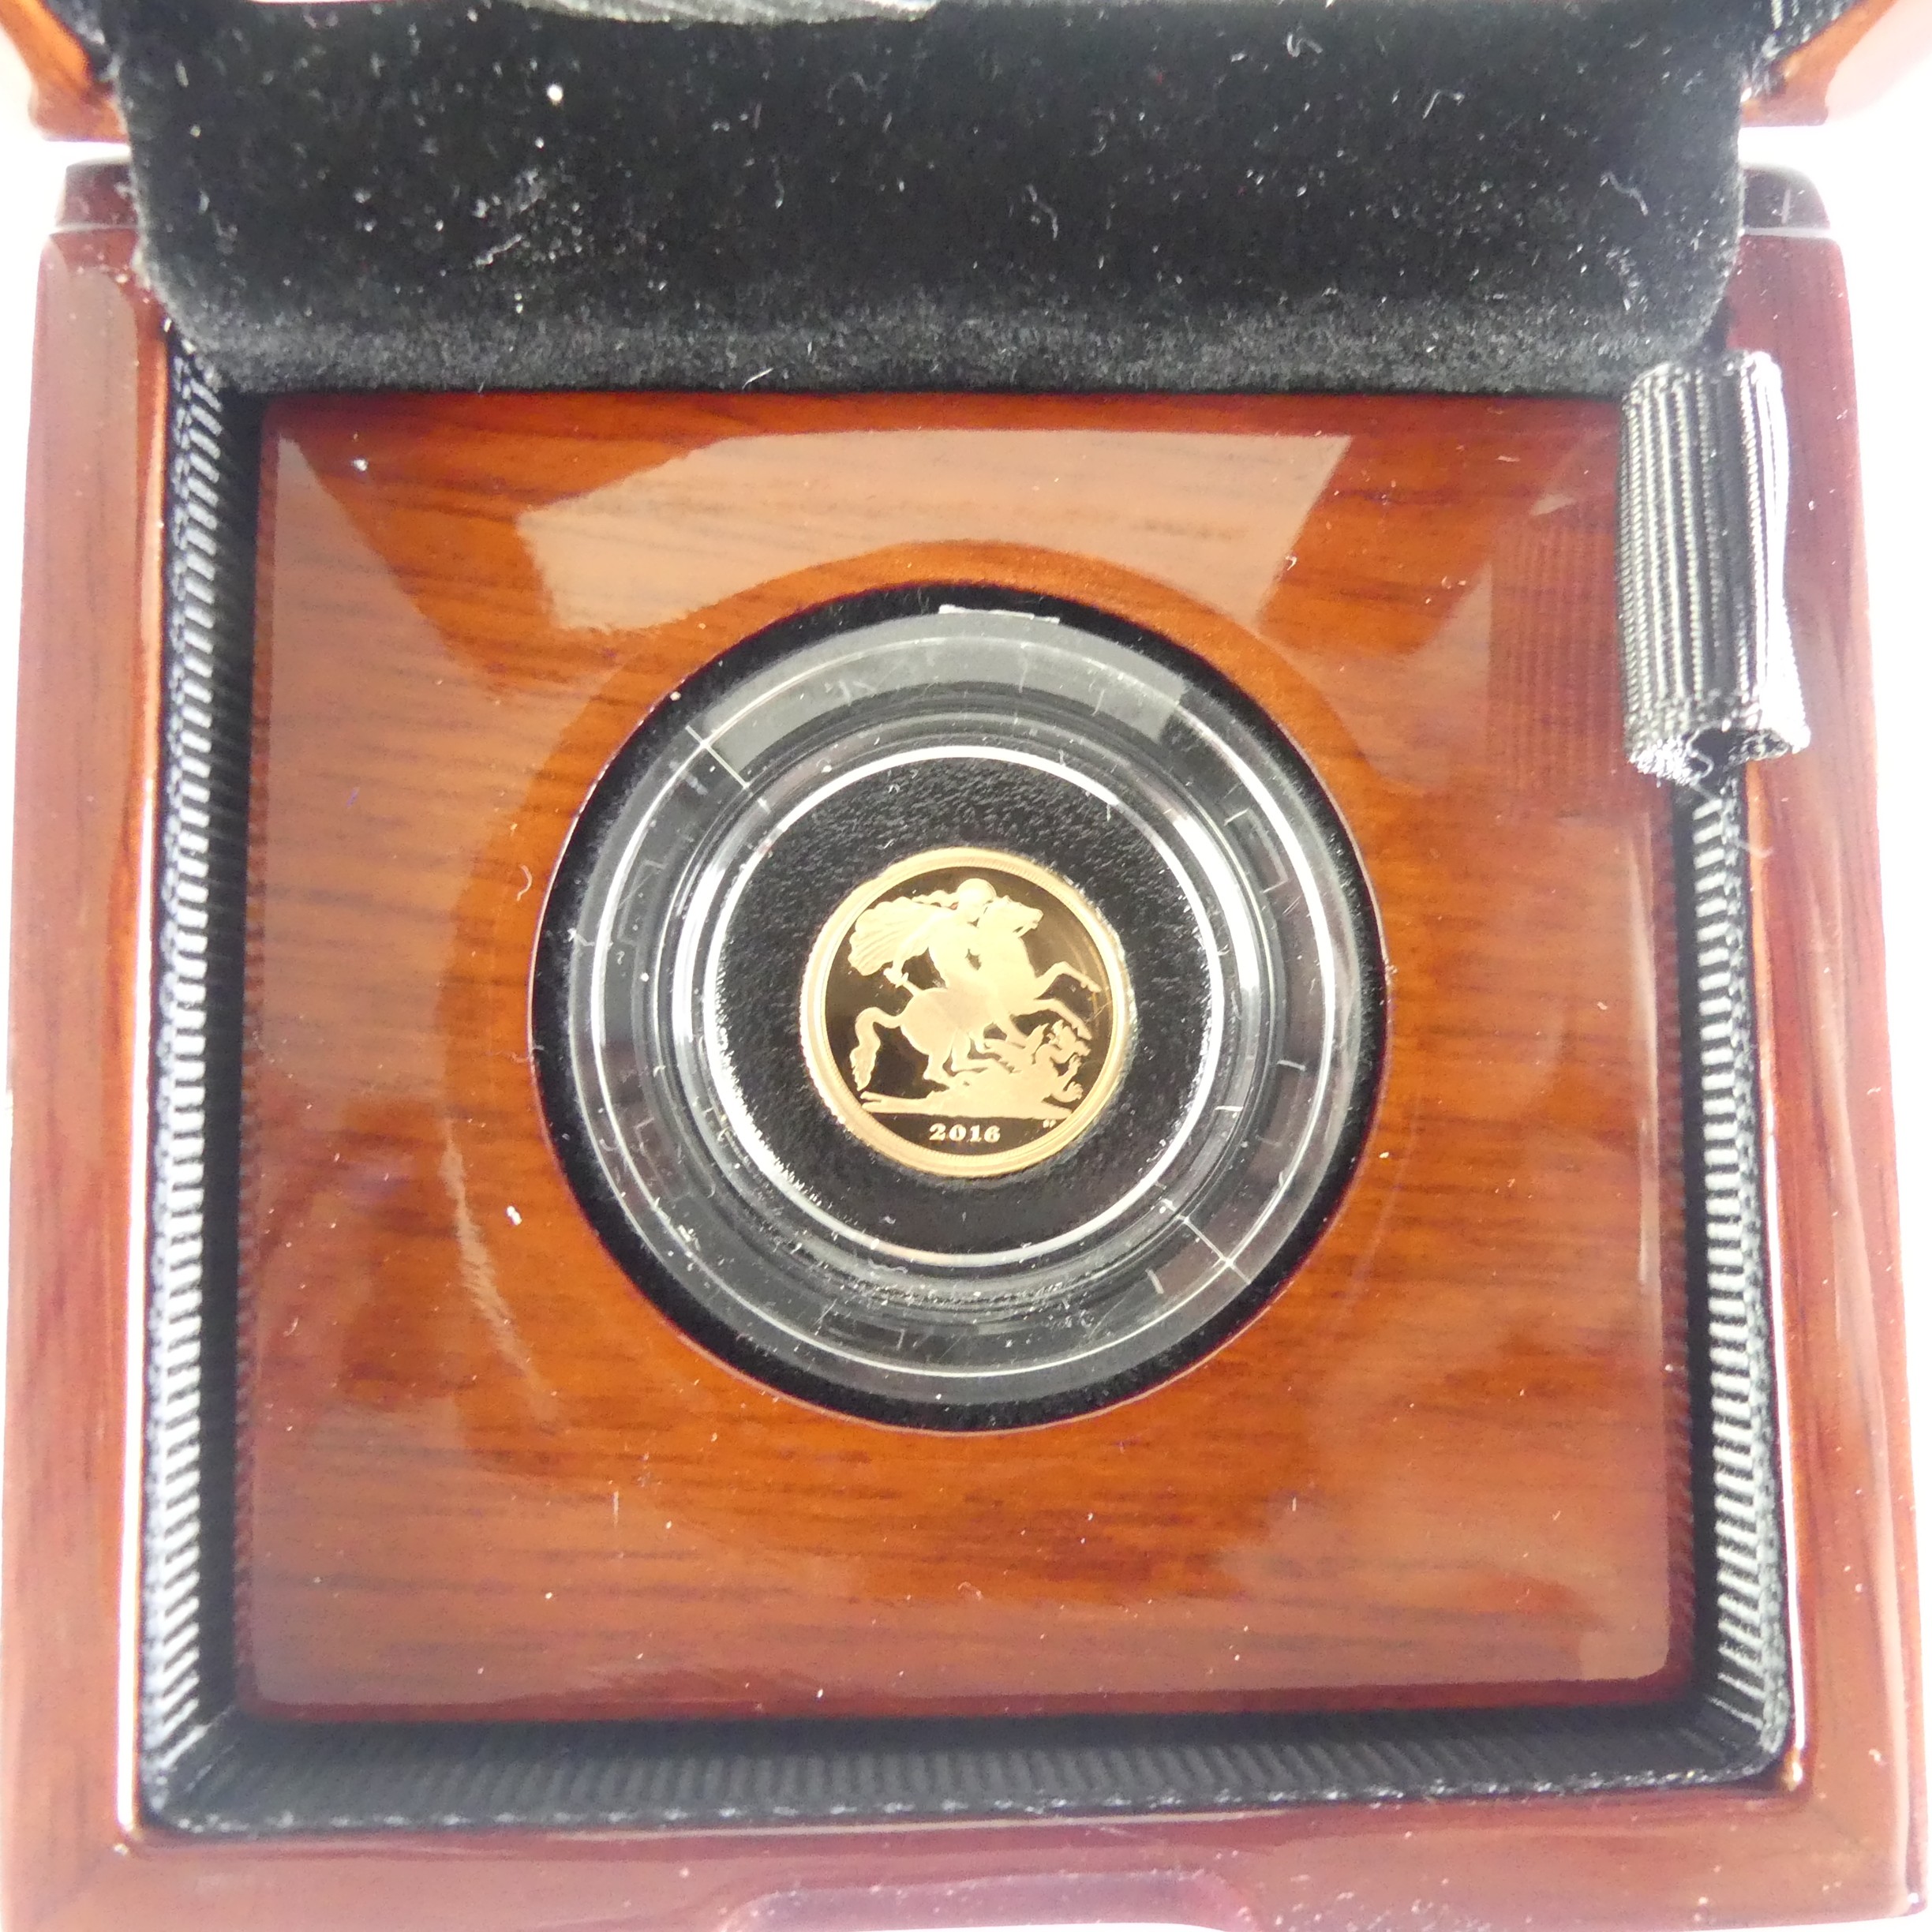 An Elizabeth II gold proof Quarter Sovereign, dated 2016, in Royal Mint presentation case with - Image 2 of 3